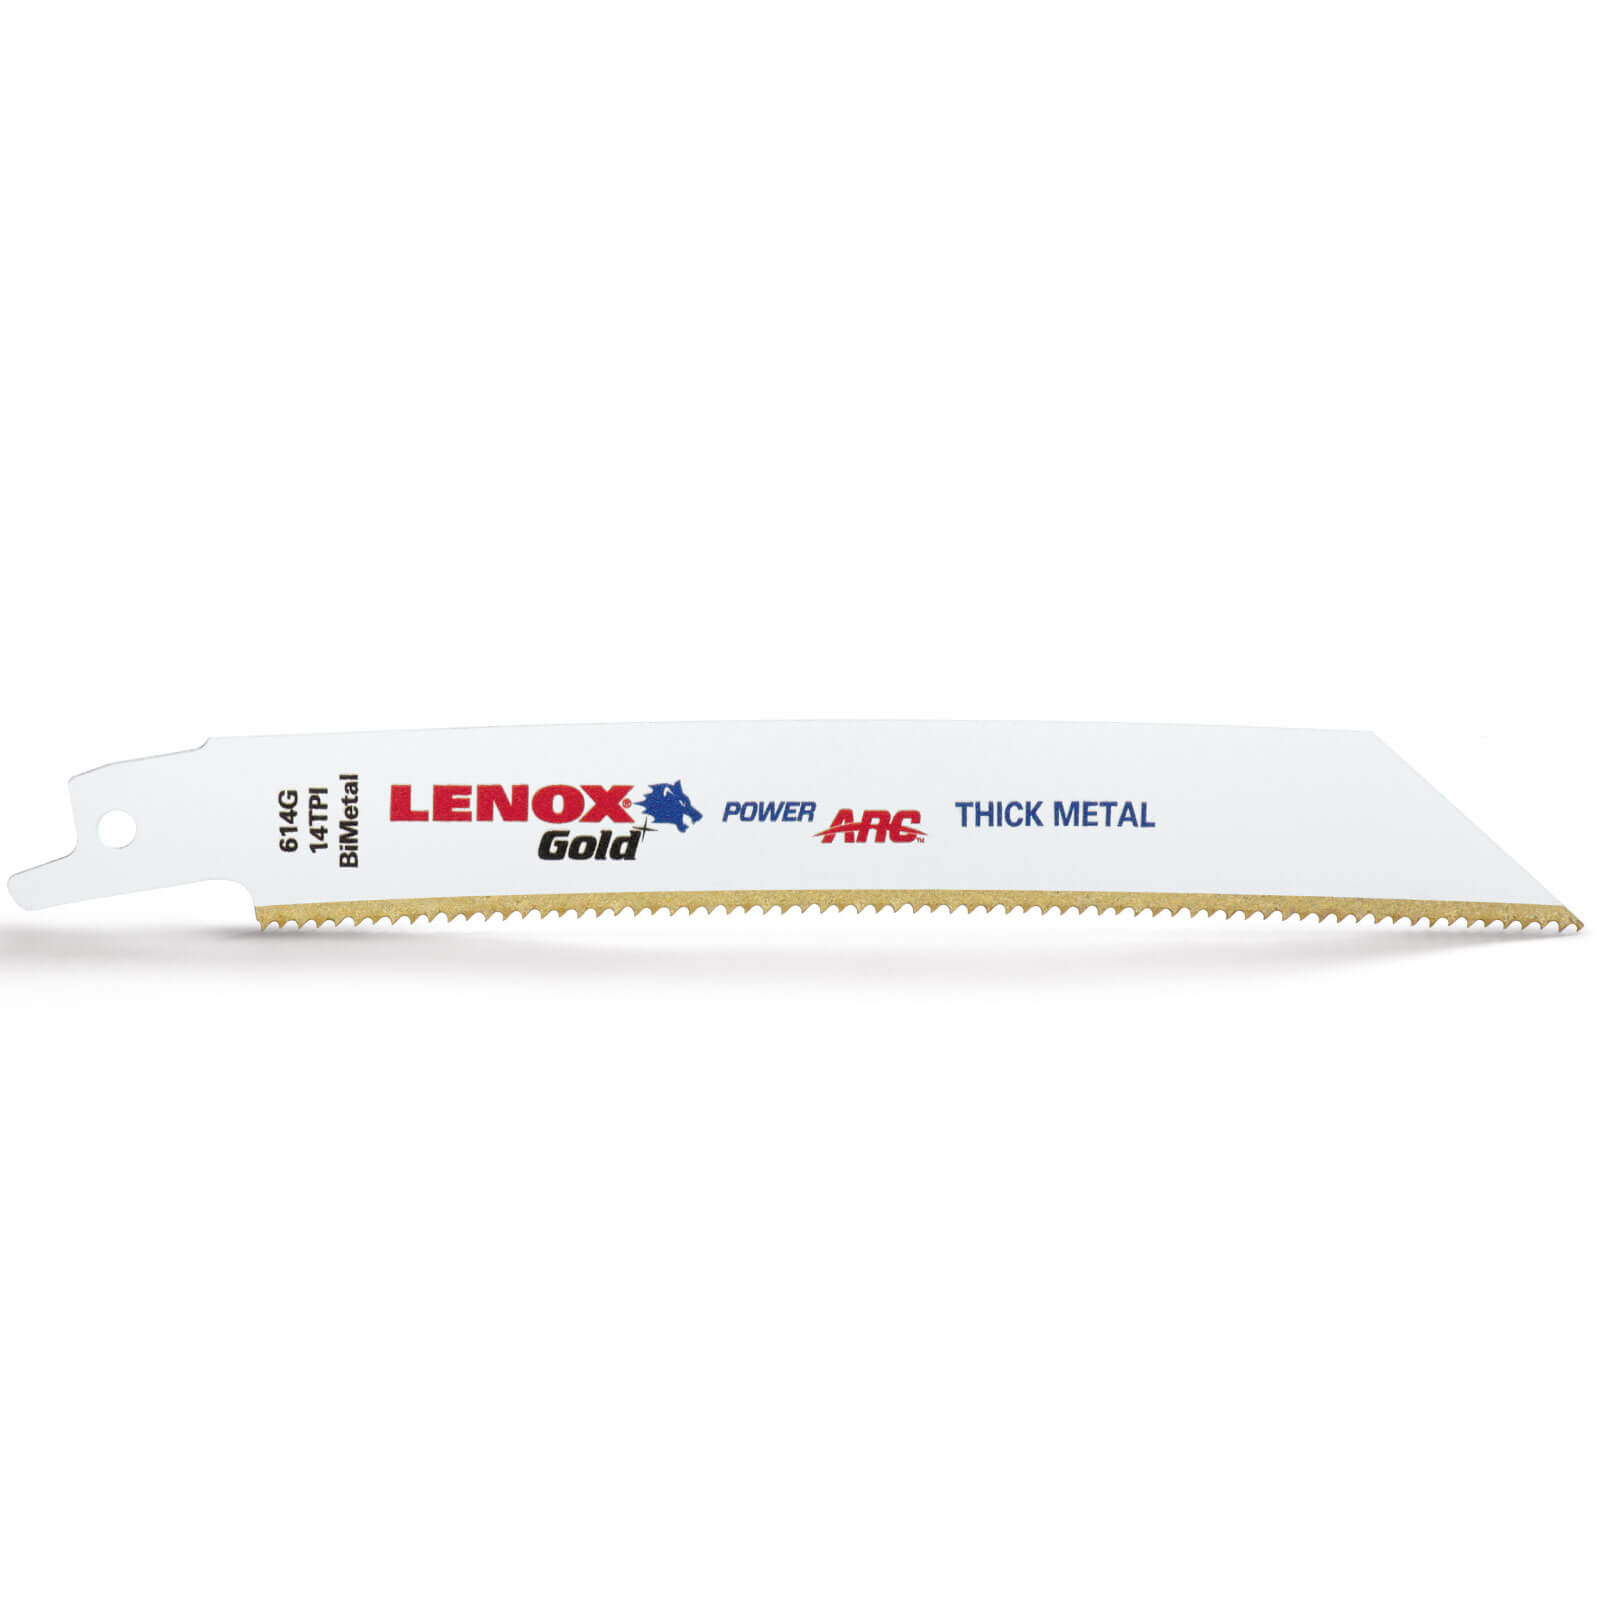 Image of Lenox Gold 14TPI Thick Metal Cutting Reciprocating Sabre Saw Blades 152mm Pack of 5